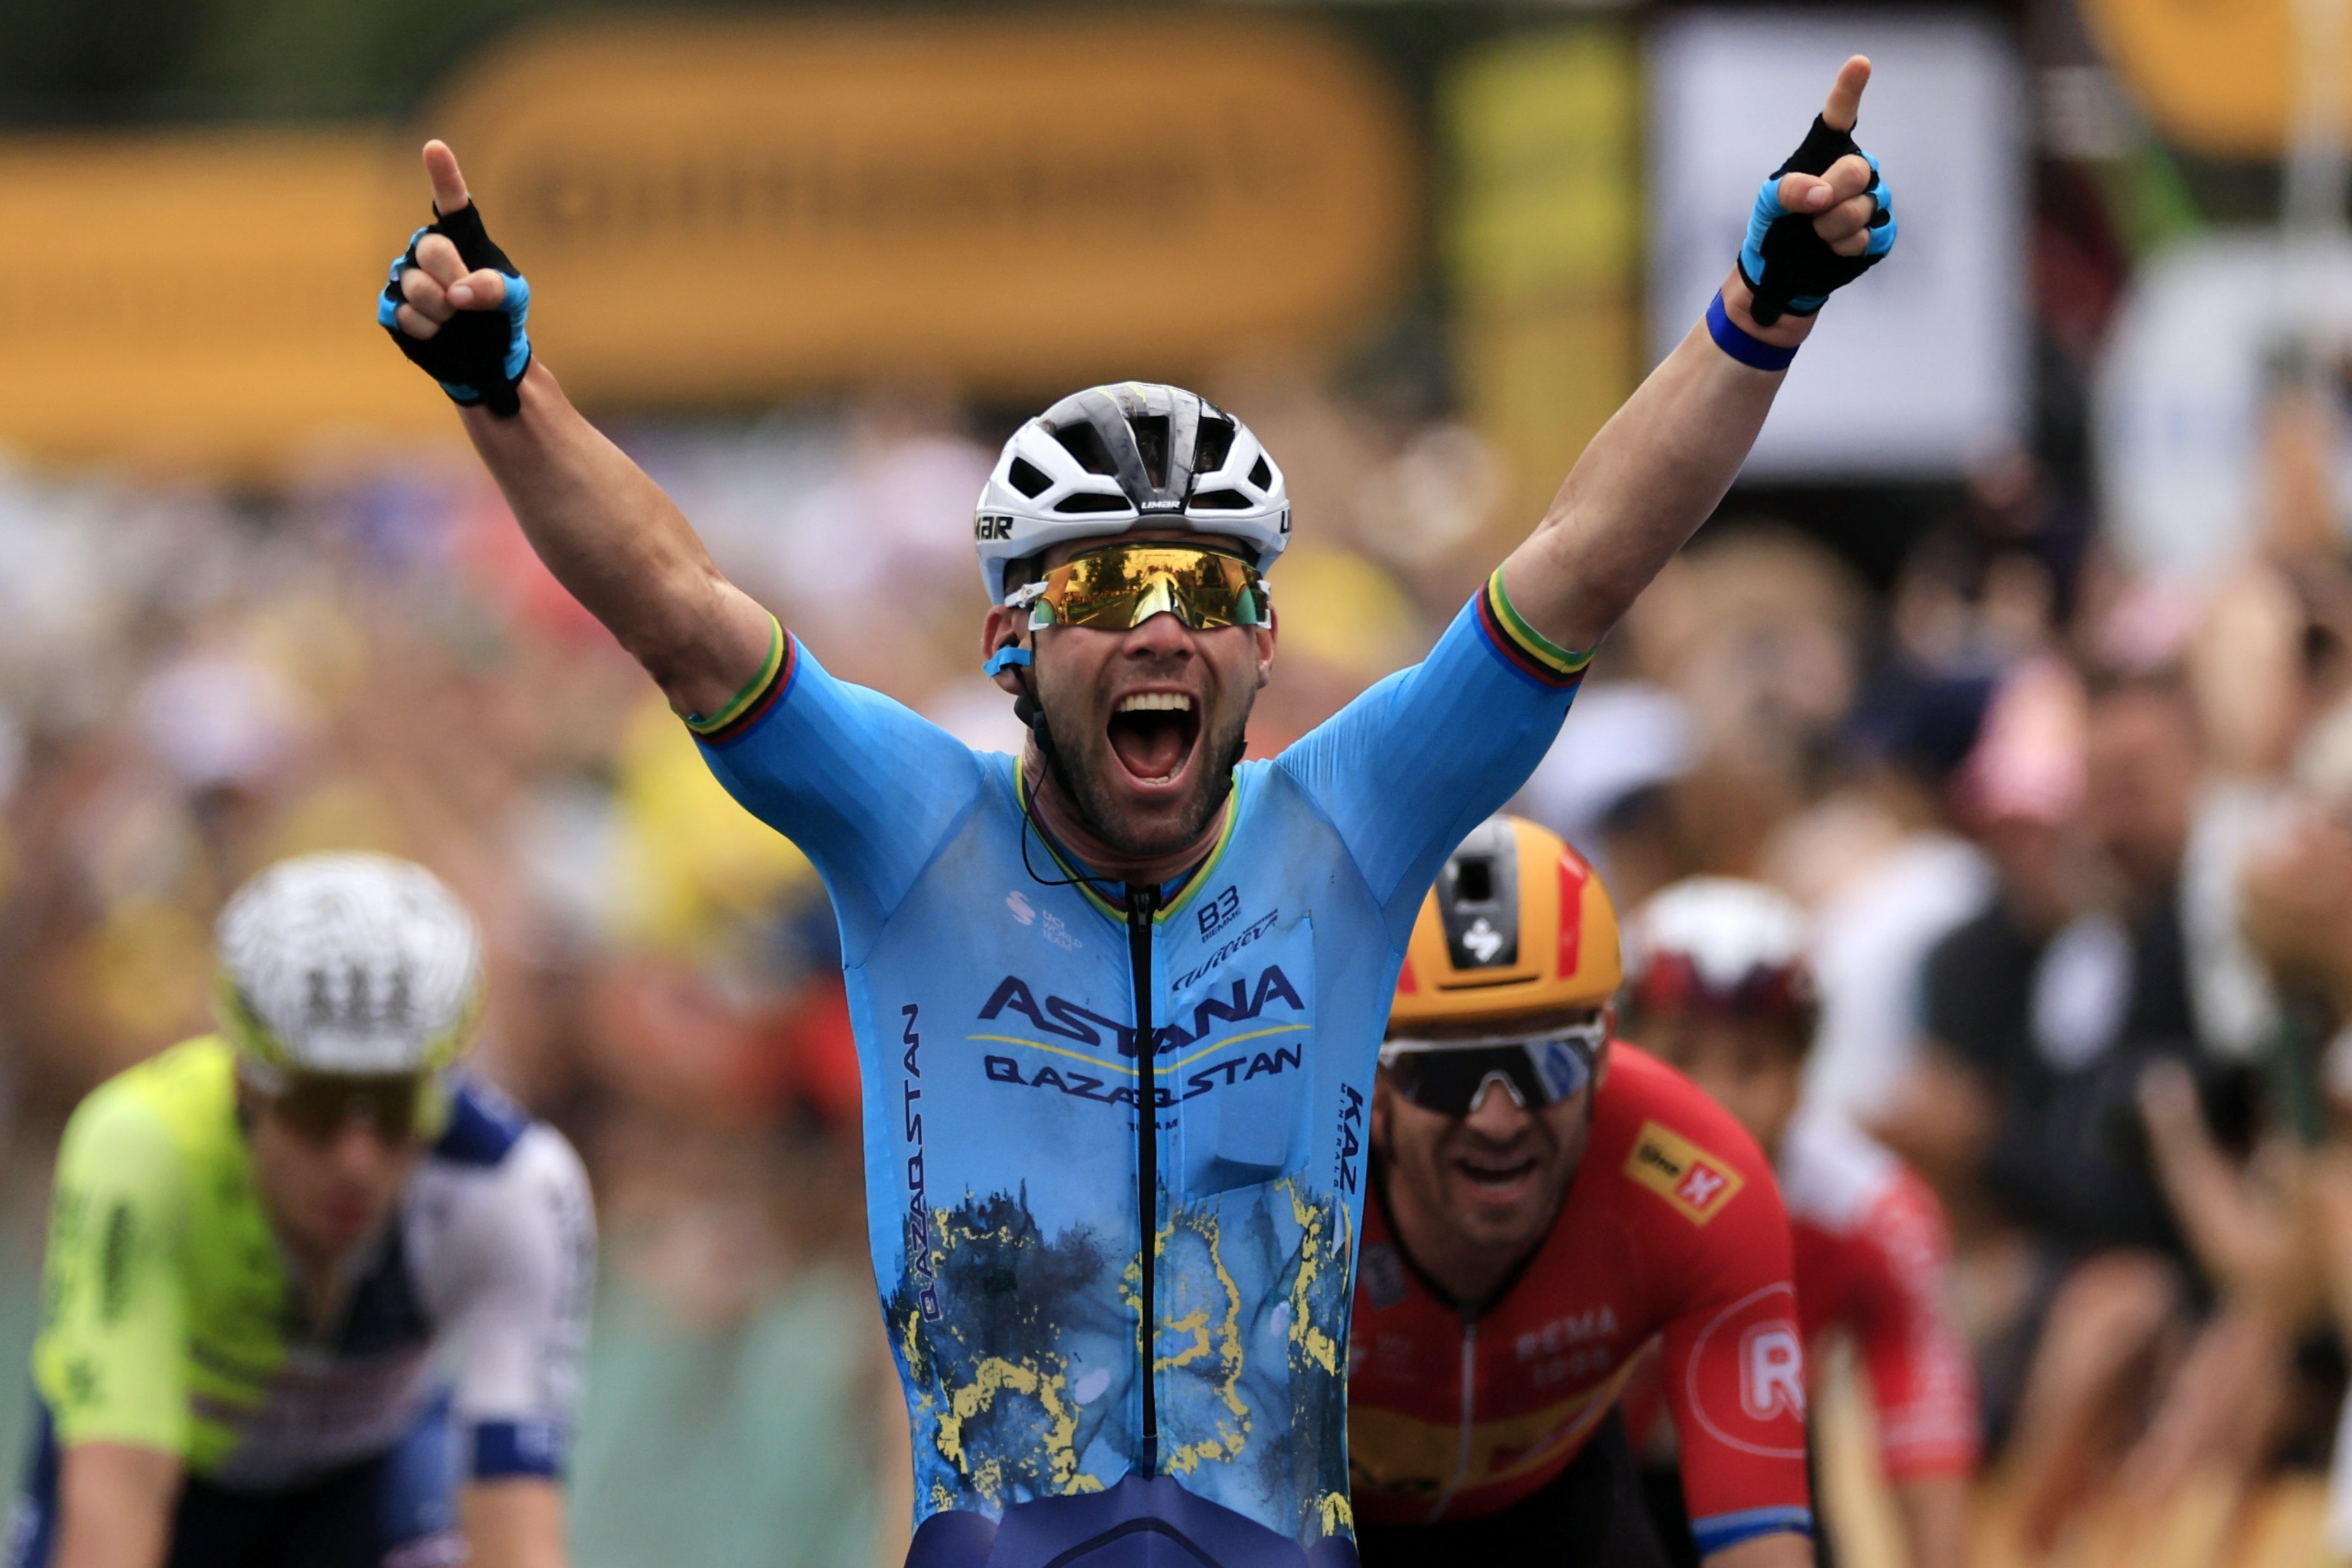 Mark Cavendish claimed his record-breaking 35th Tour stage victory